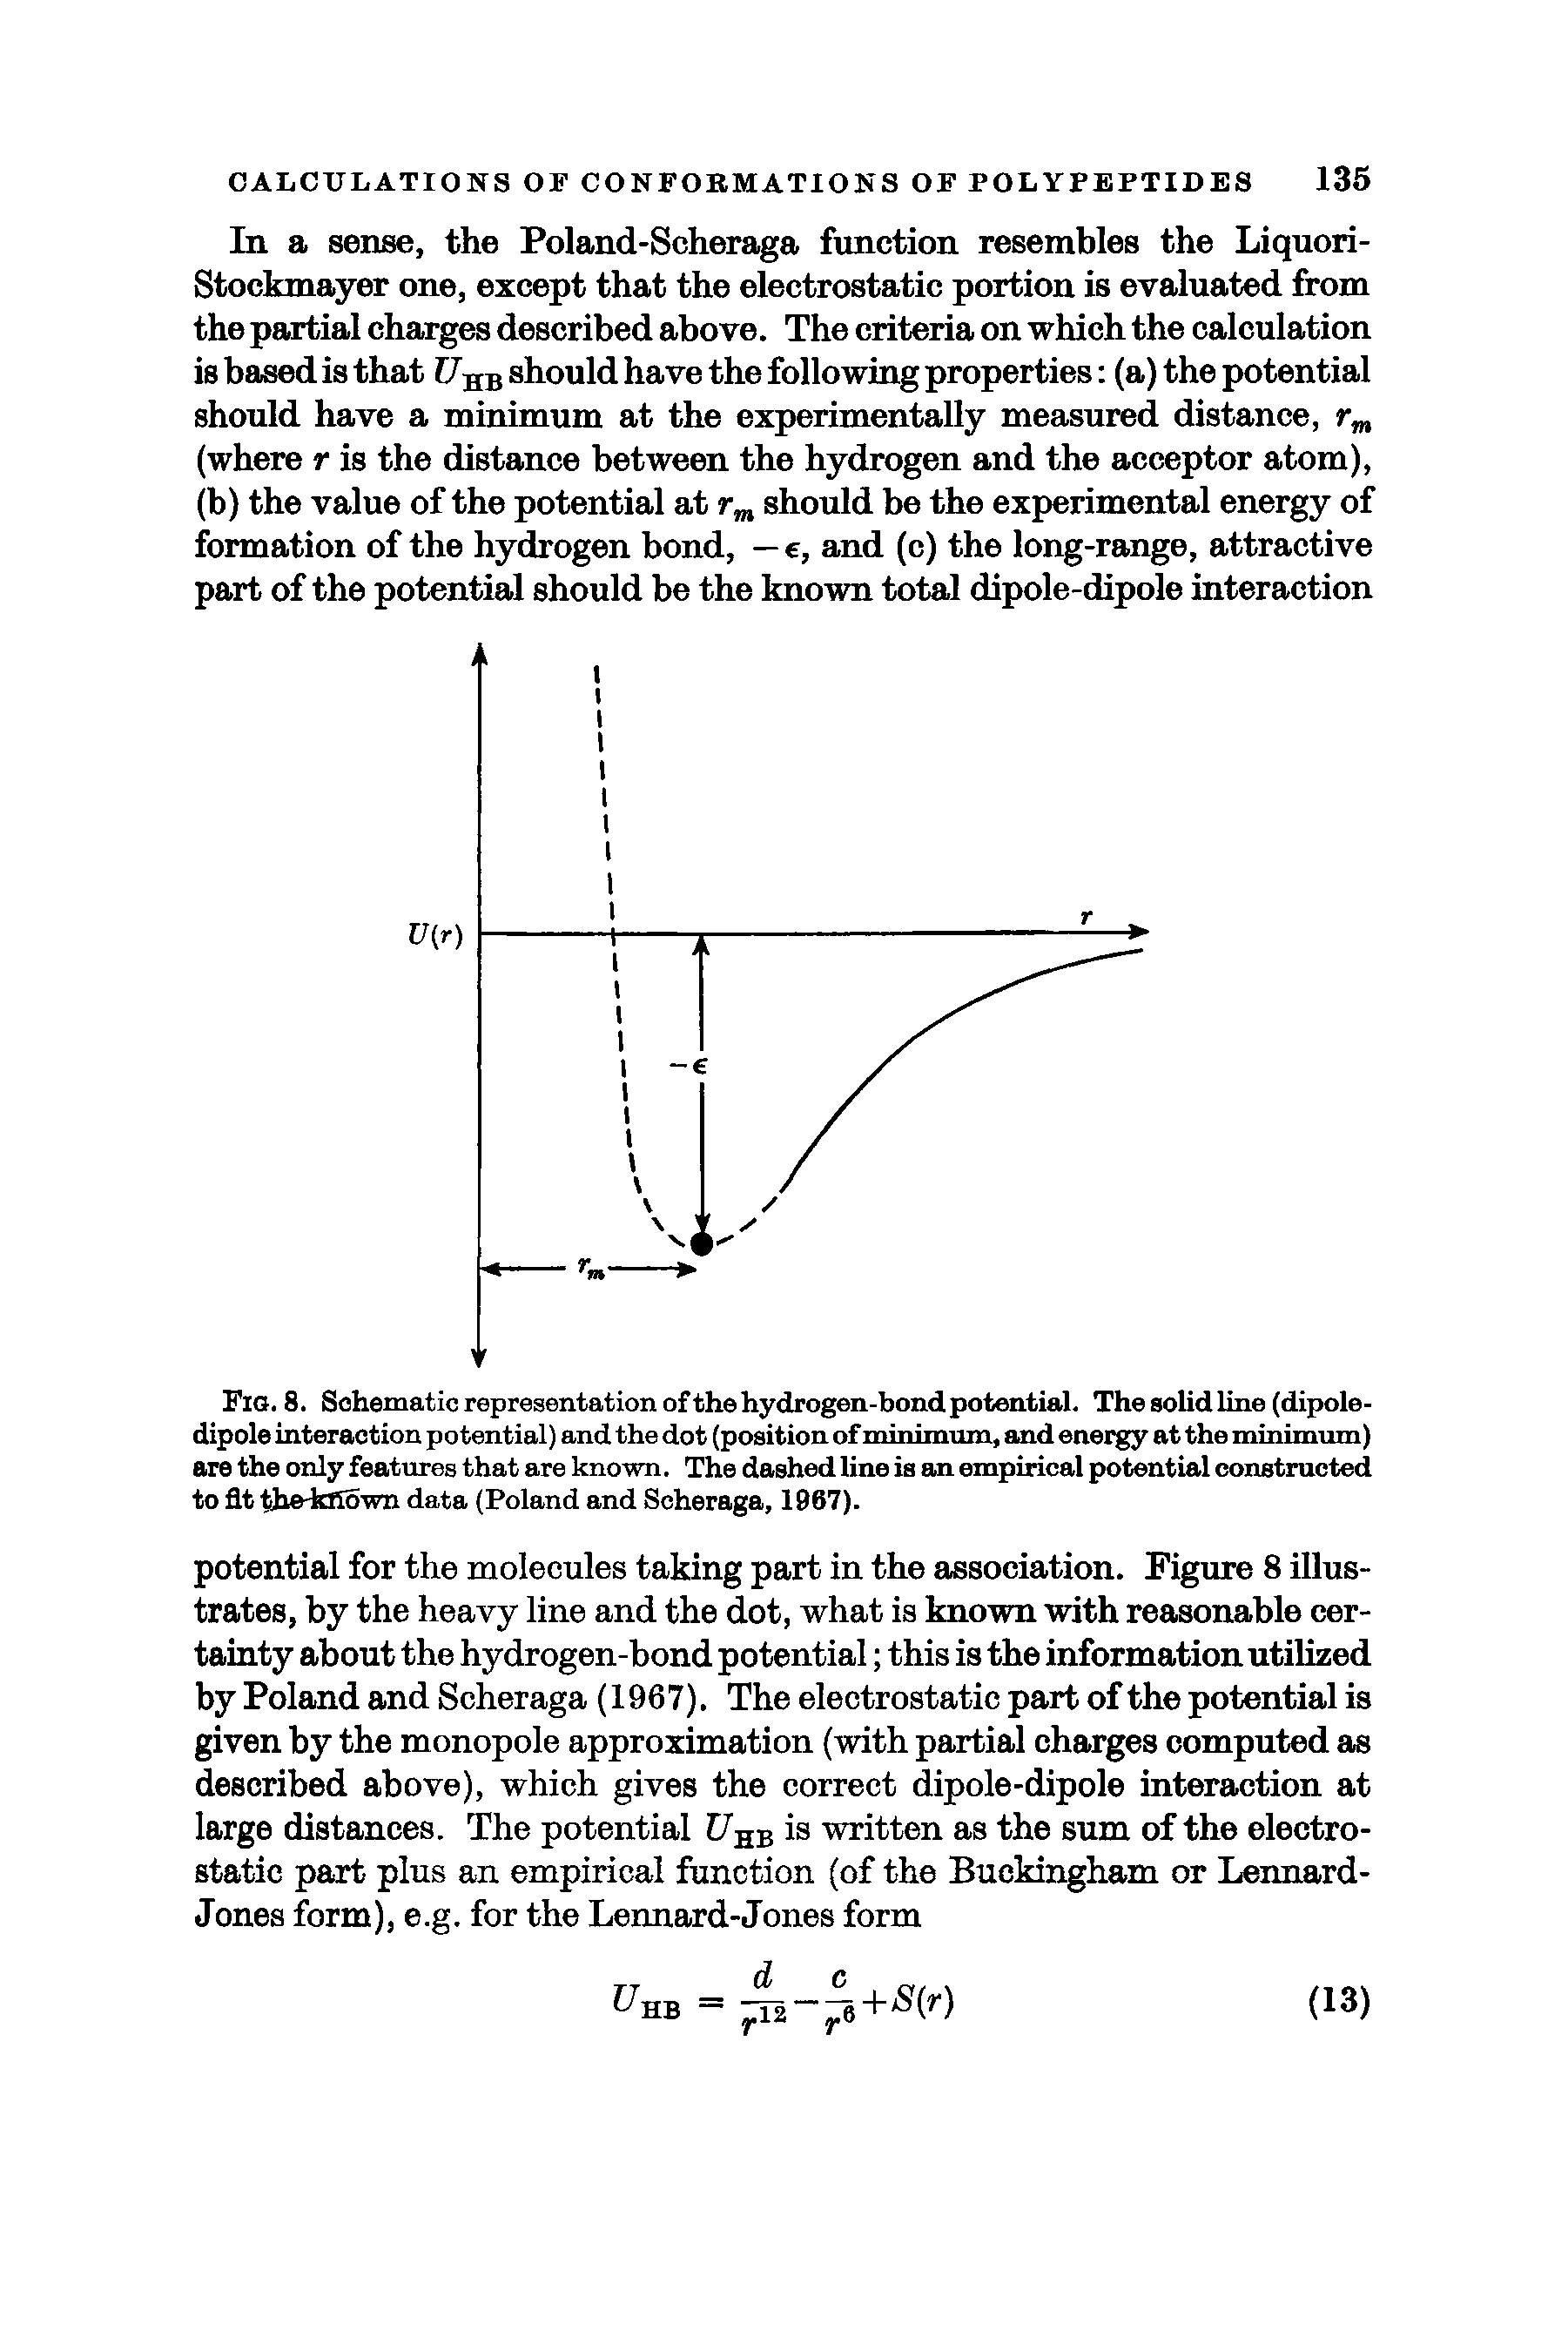 Fig. 8. Schematic representation of the hydrogen-bond potential. The solidline (dipole-dipole interaction potential) and the dot (position of minimum, and energy at the minimum) are the only features that are known. The dashed line is an empirical potential constructed to fit tiho-kfiown data (Poland and Scheraga, 1967).